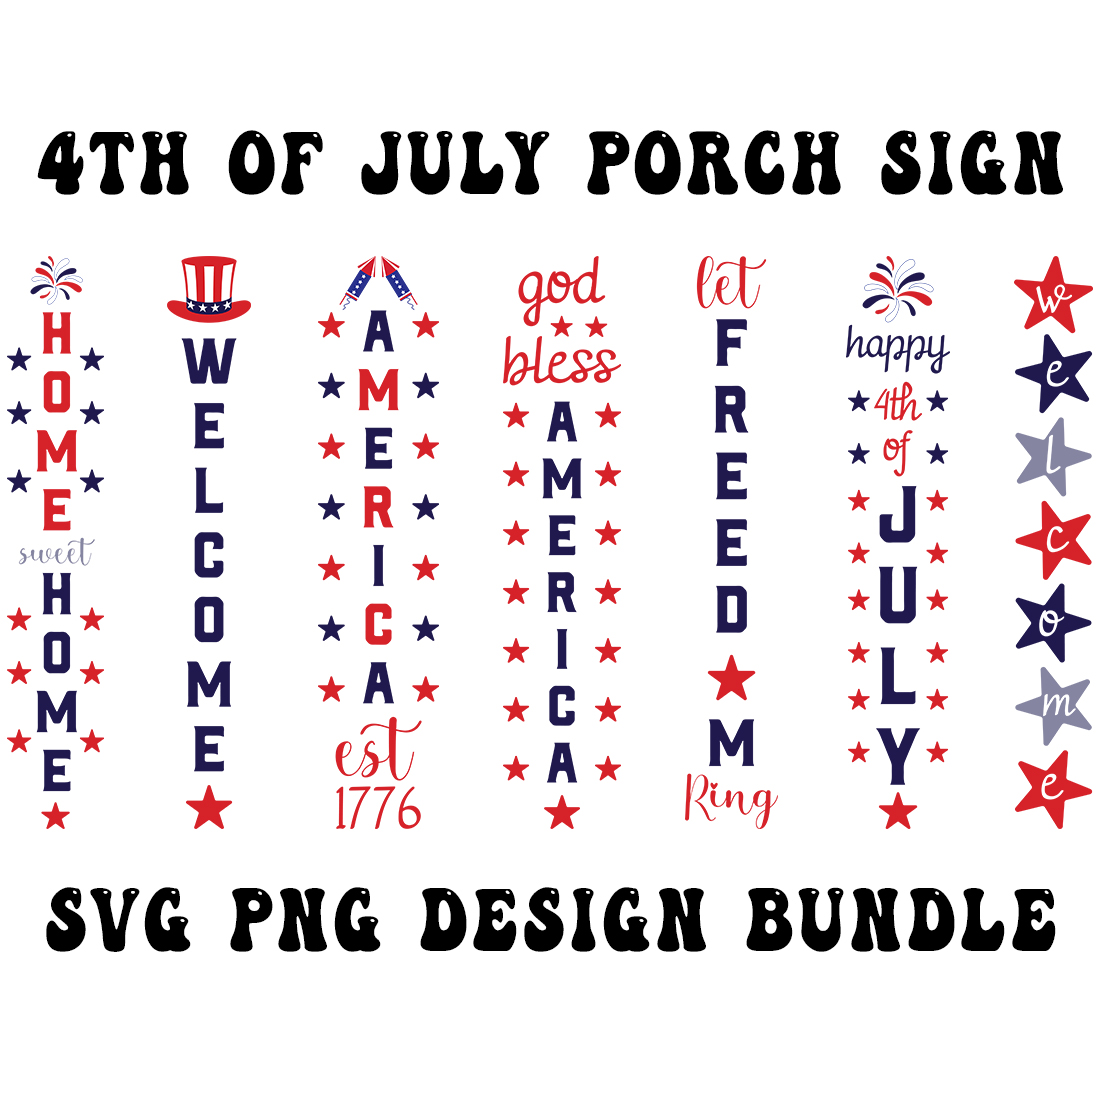 4th of July Porch Sign SVG Bundle preview image.